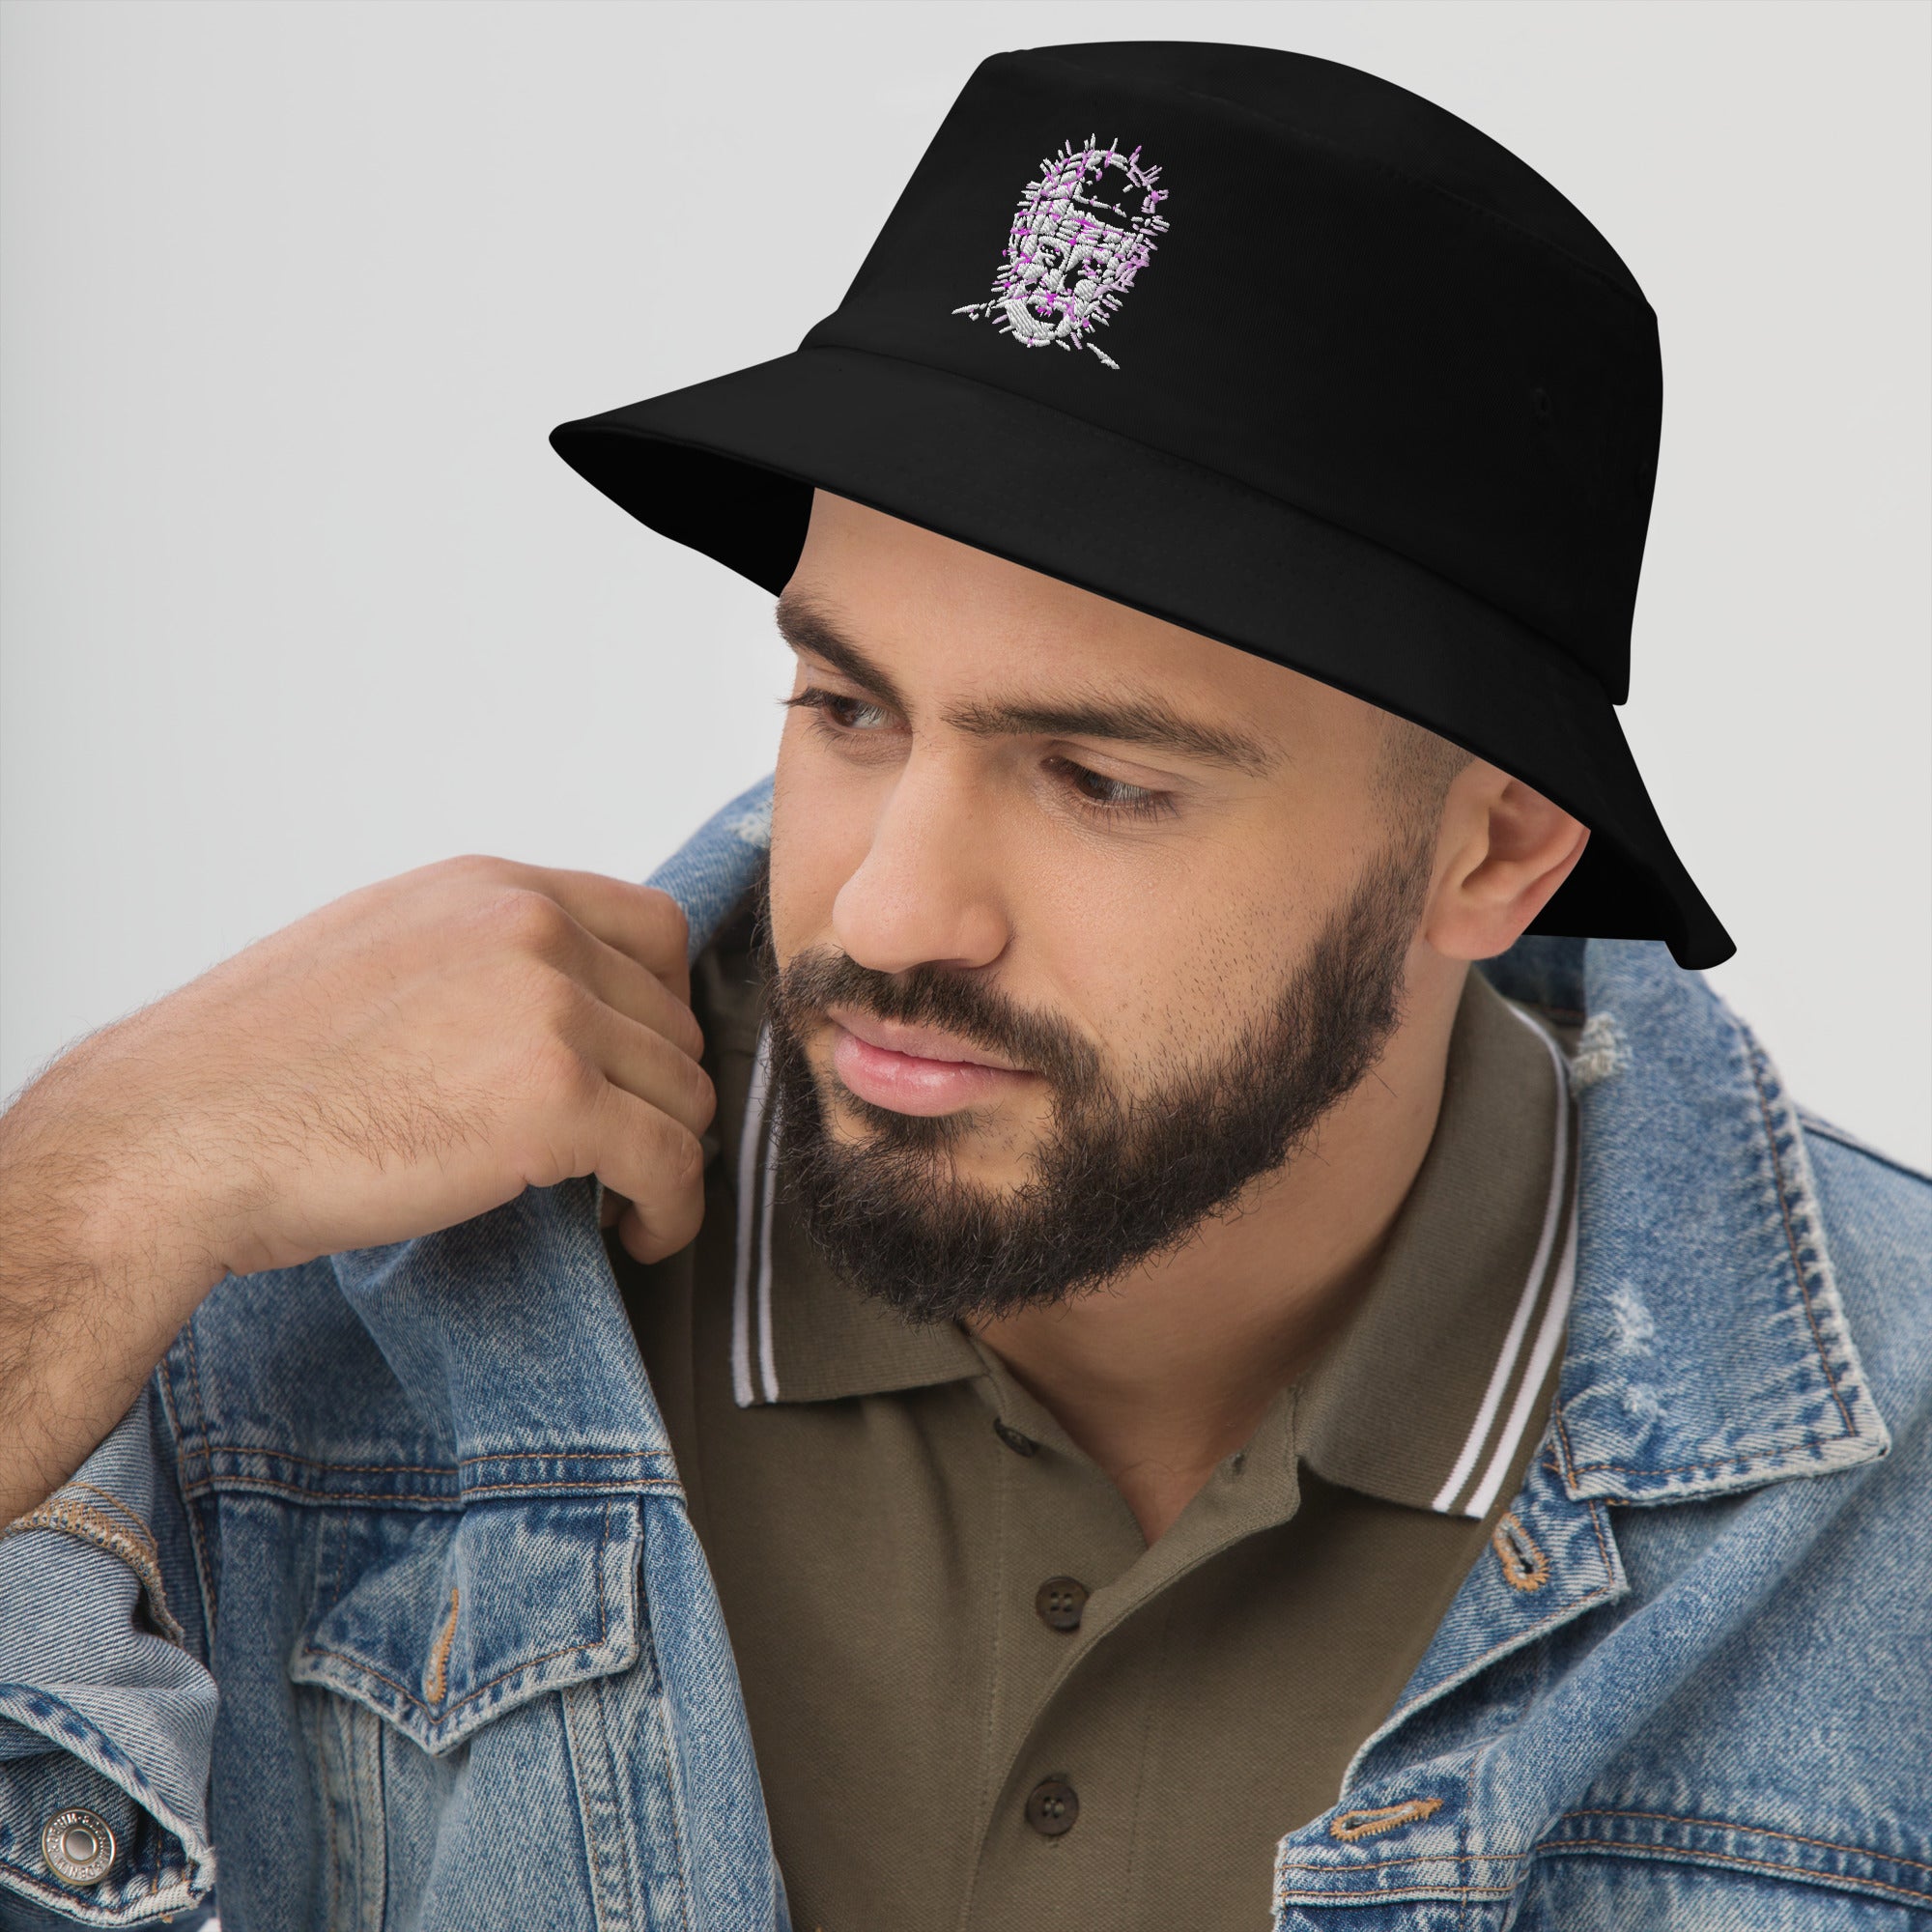 The Hell Priest Cenobite Demon Embroidered Bucket Hat